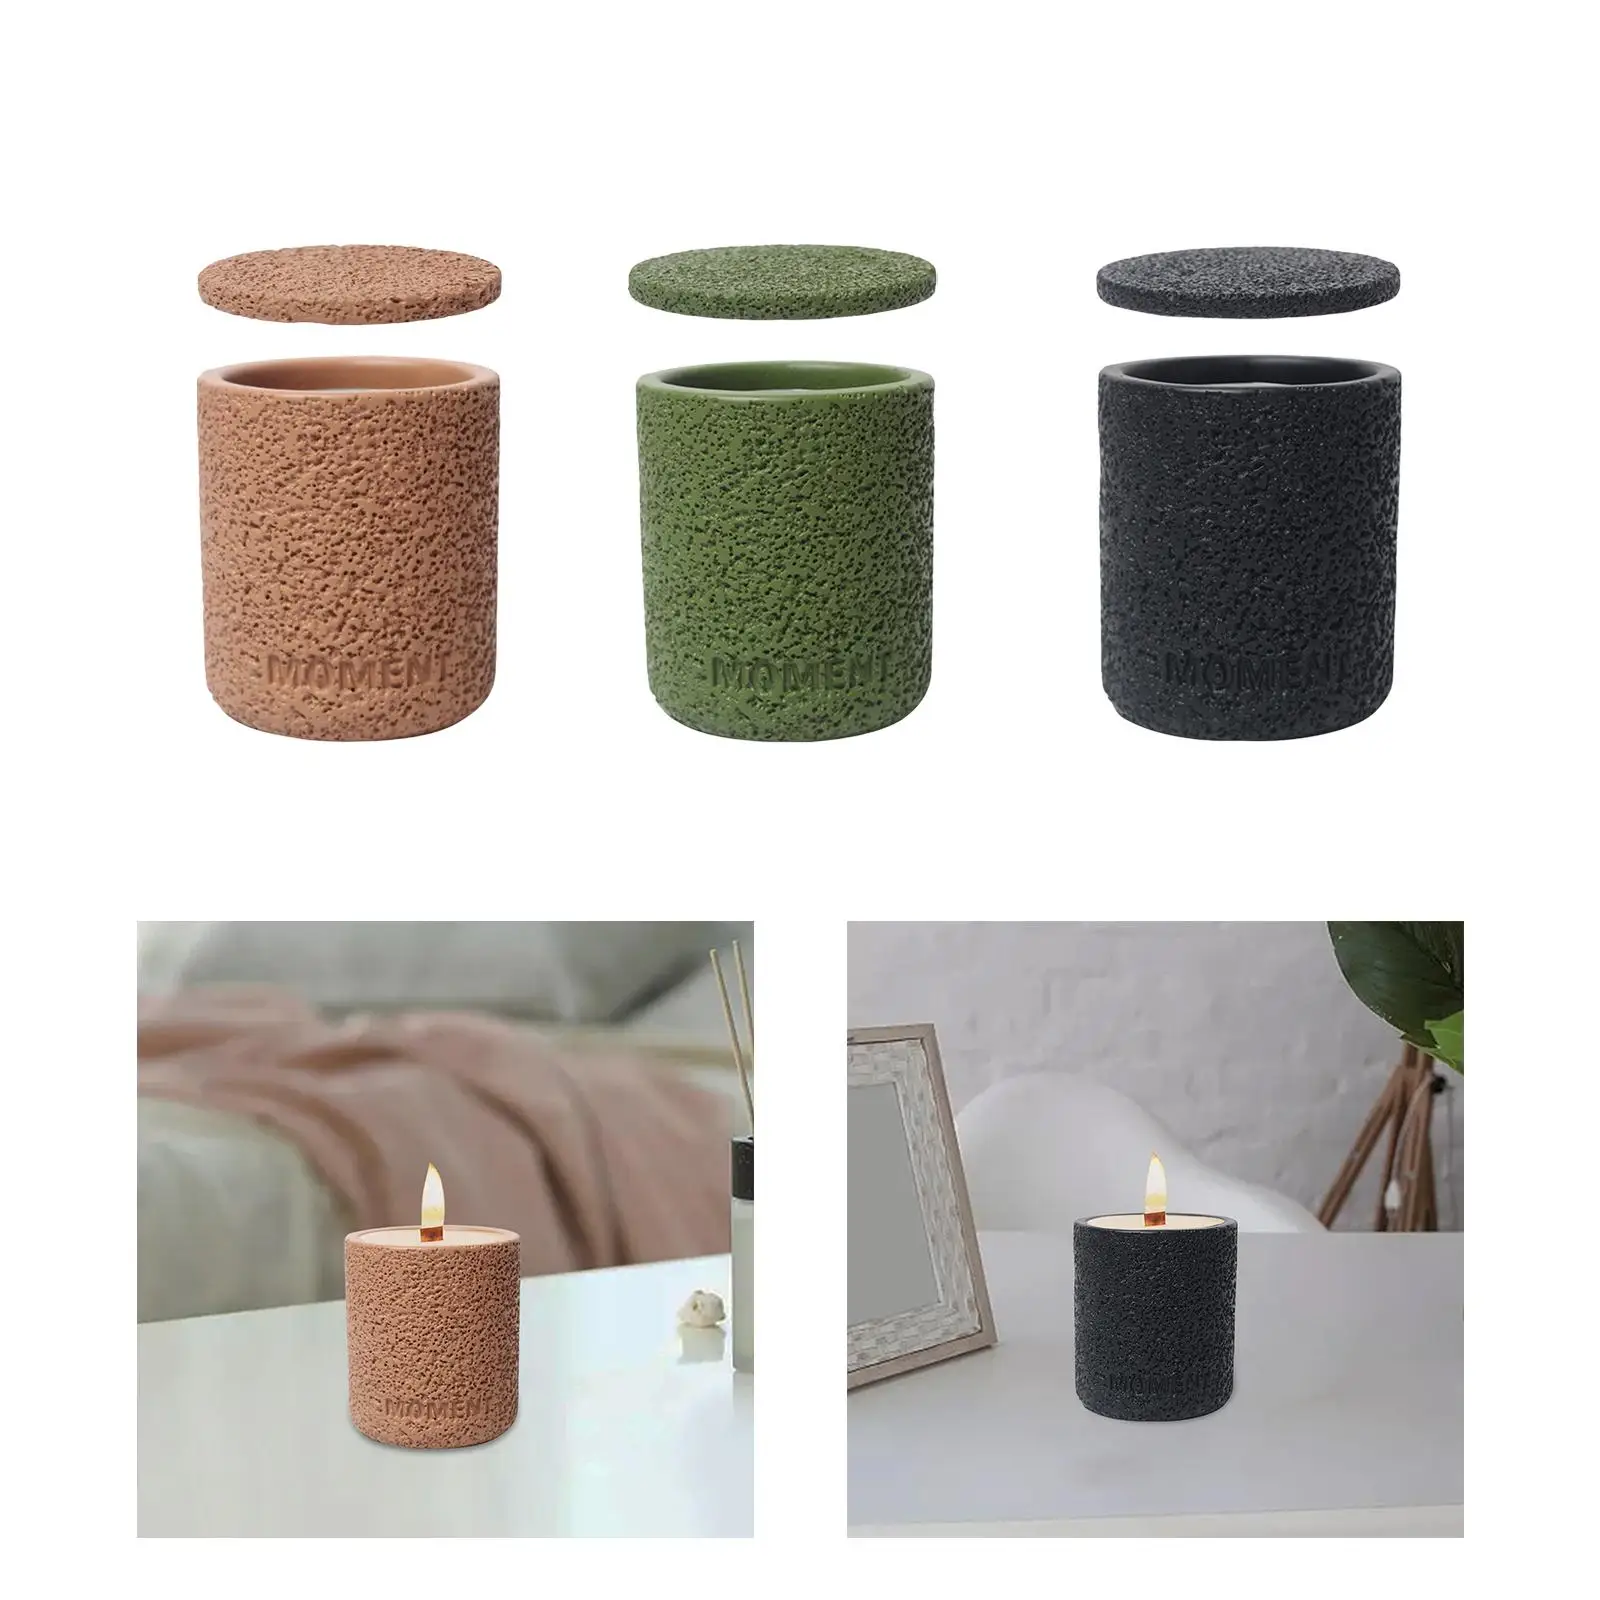 Votive Candle Holders for Table Centerpieces Festival Decorative with Lid Dining Coffee Table Cement Tea Lights Candle Holder images - 6